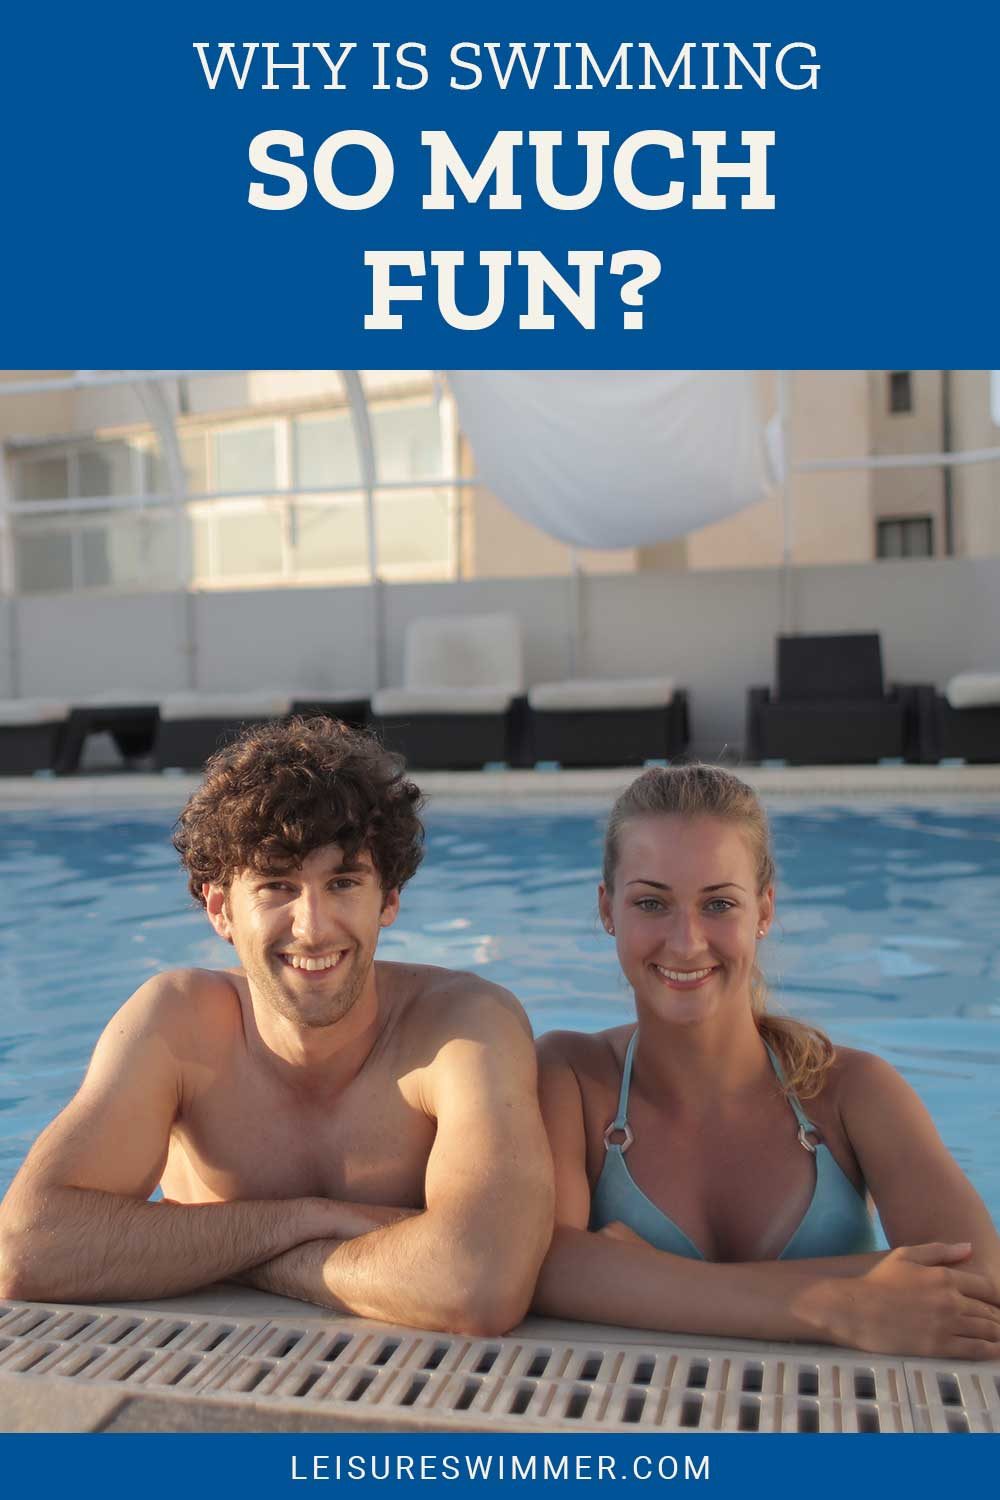 Man and woman smiling in a swimming pool - Why Is Swimming So Much Fun?